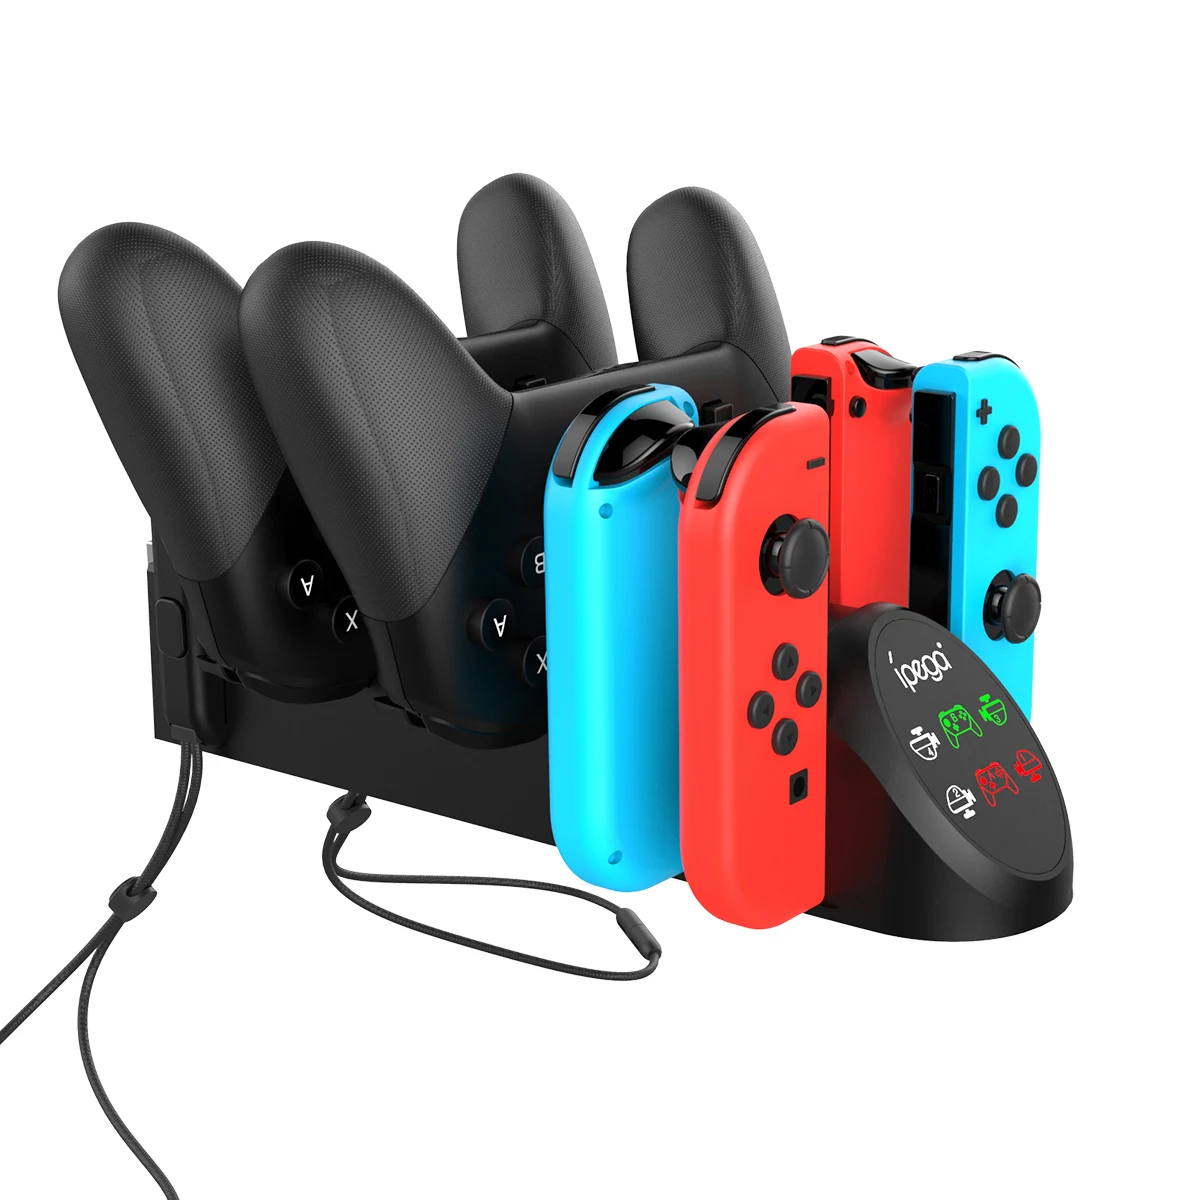 Charging Dock Compatible with N-Switch Pro Controllers and for Joy Cons & OLED Model for Joycon